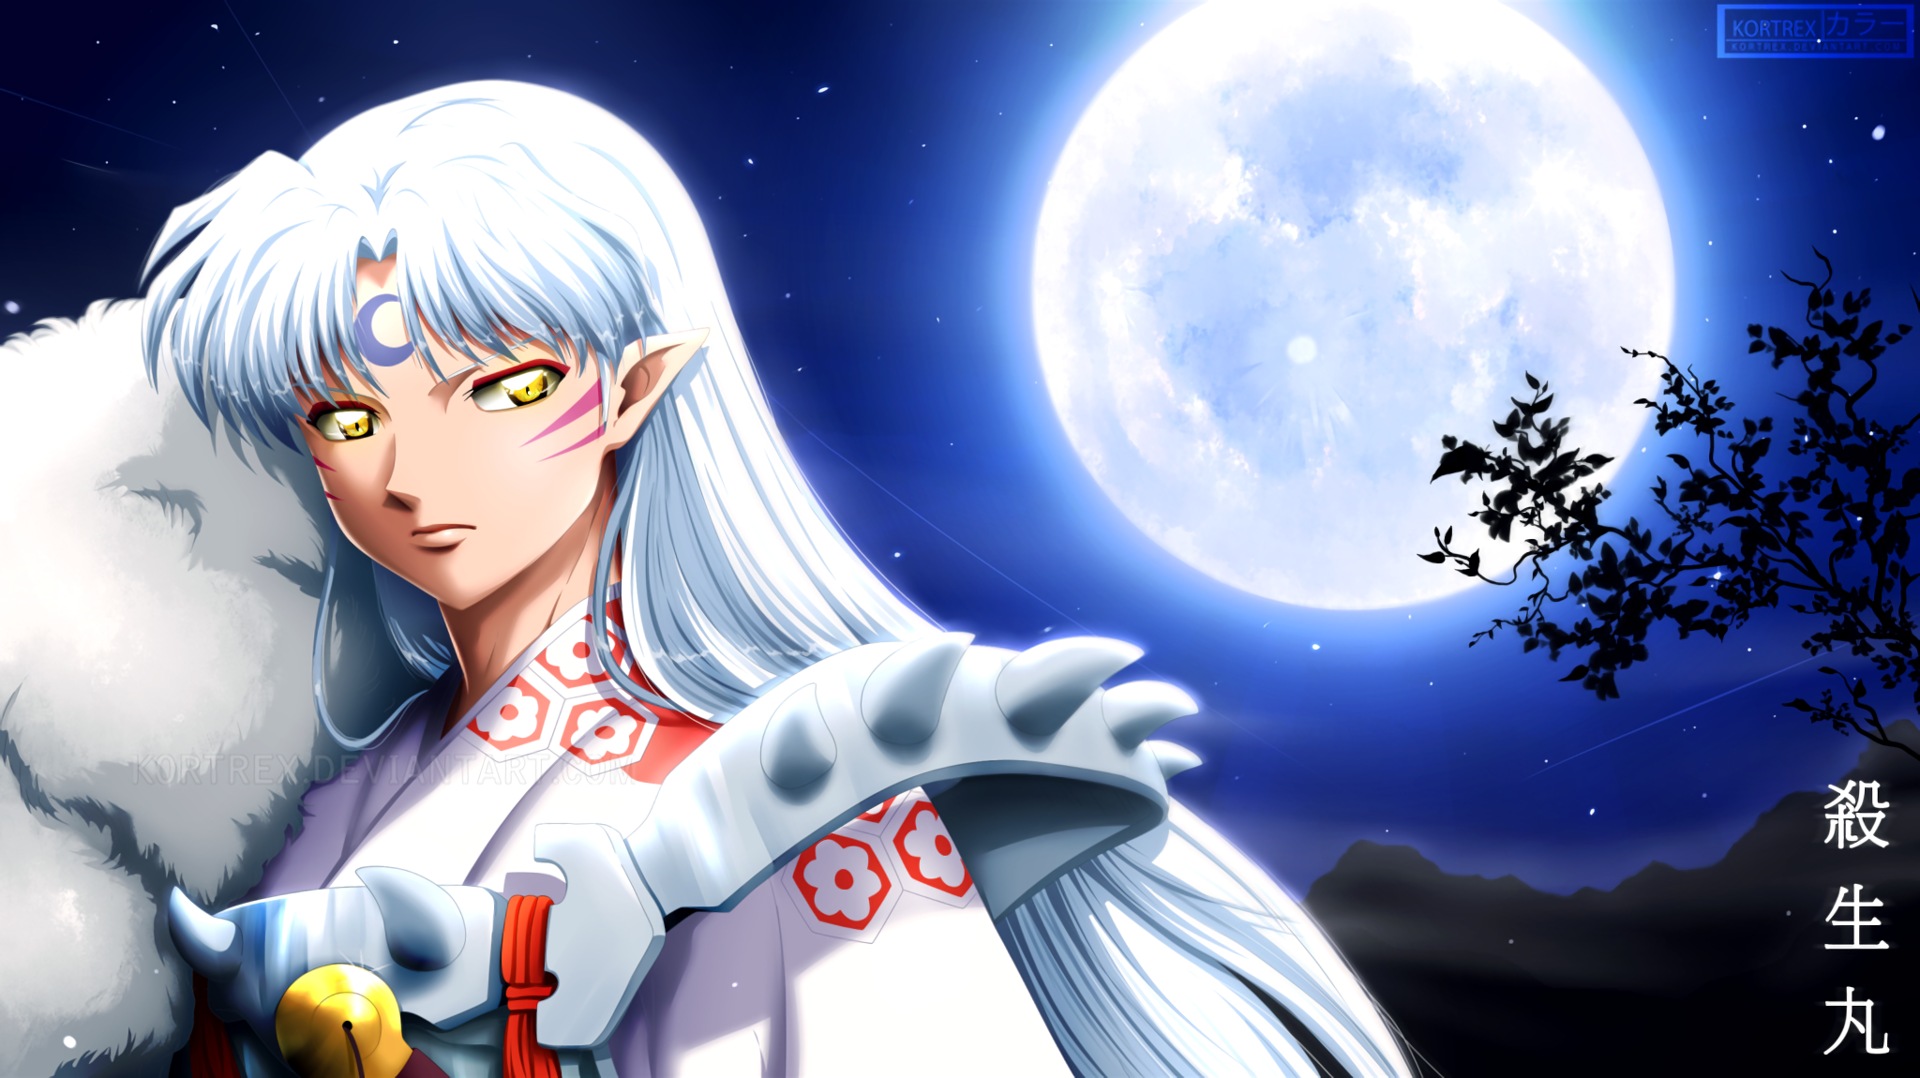 InuYasha Wallpaper And Background Image 1920x1078 ID872146 